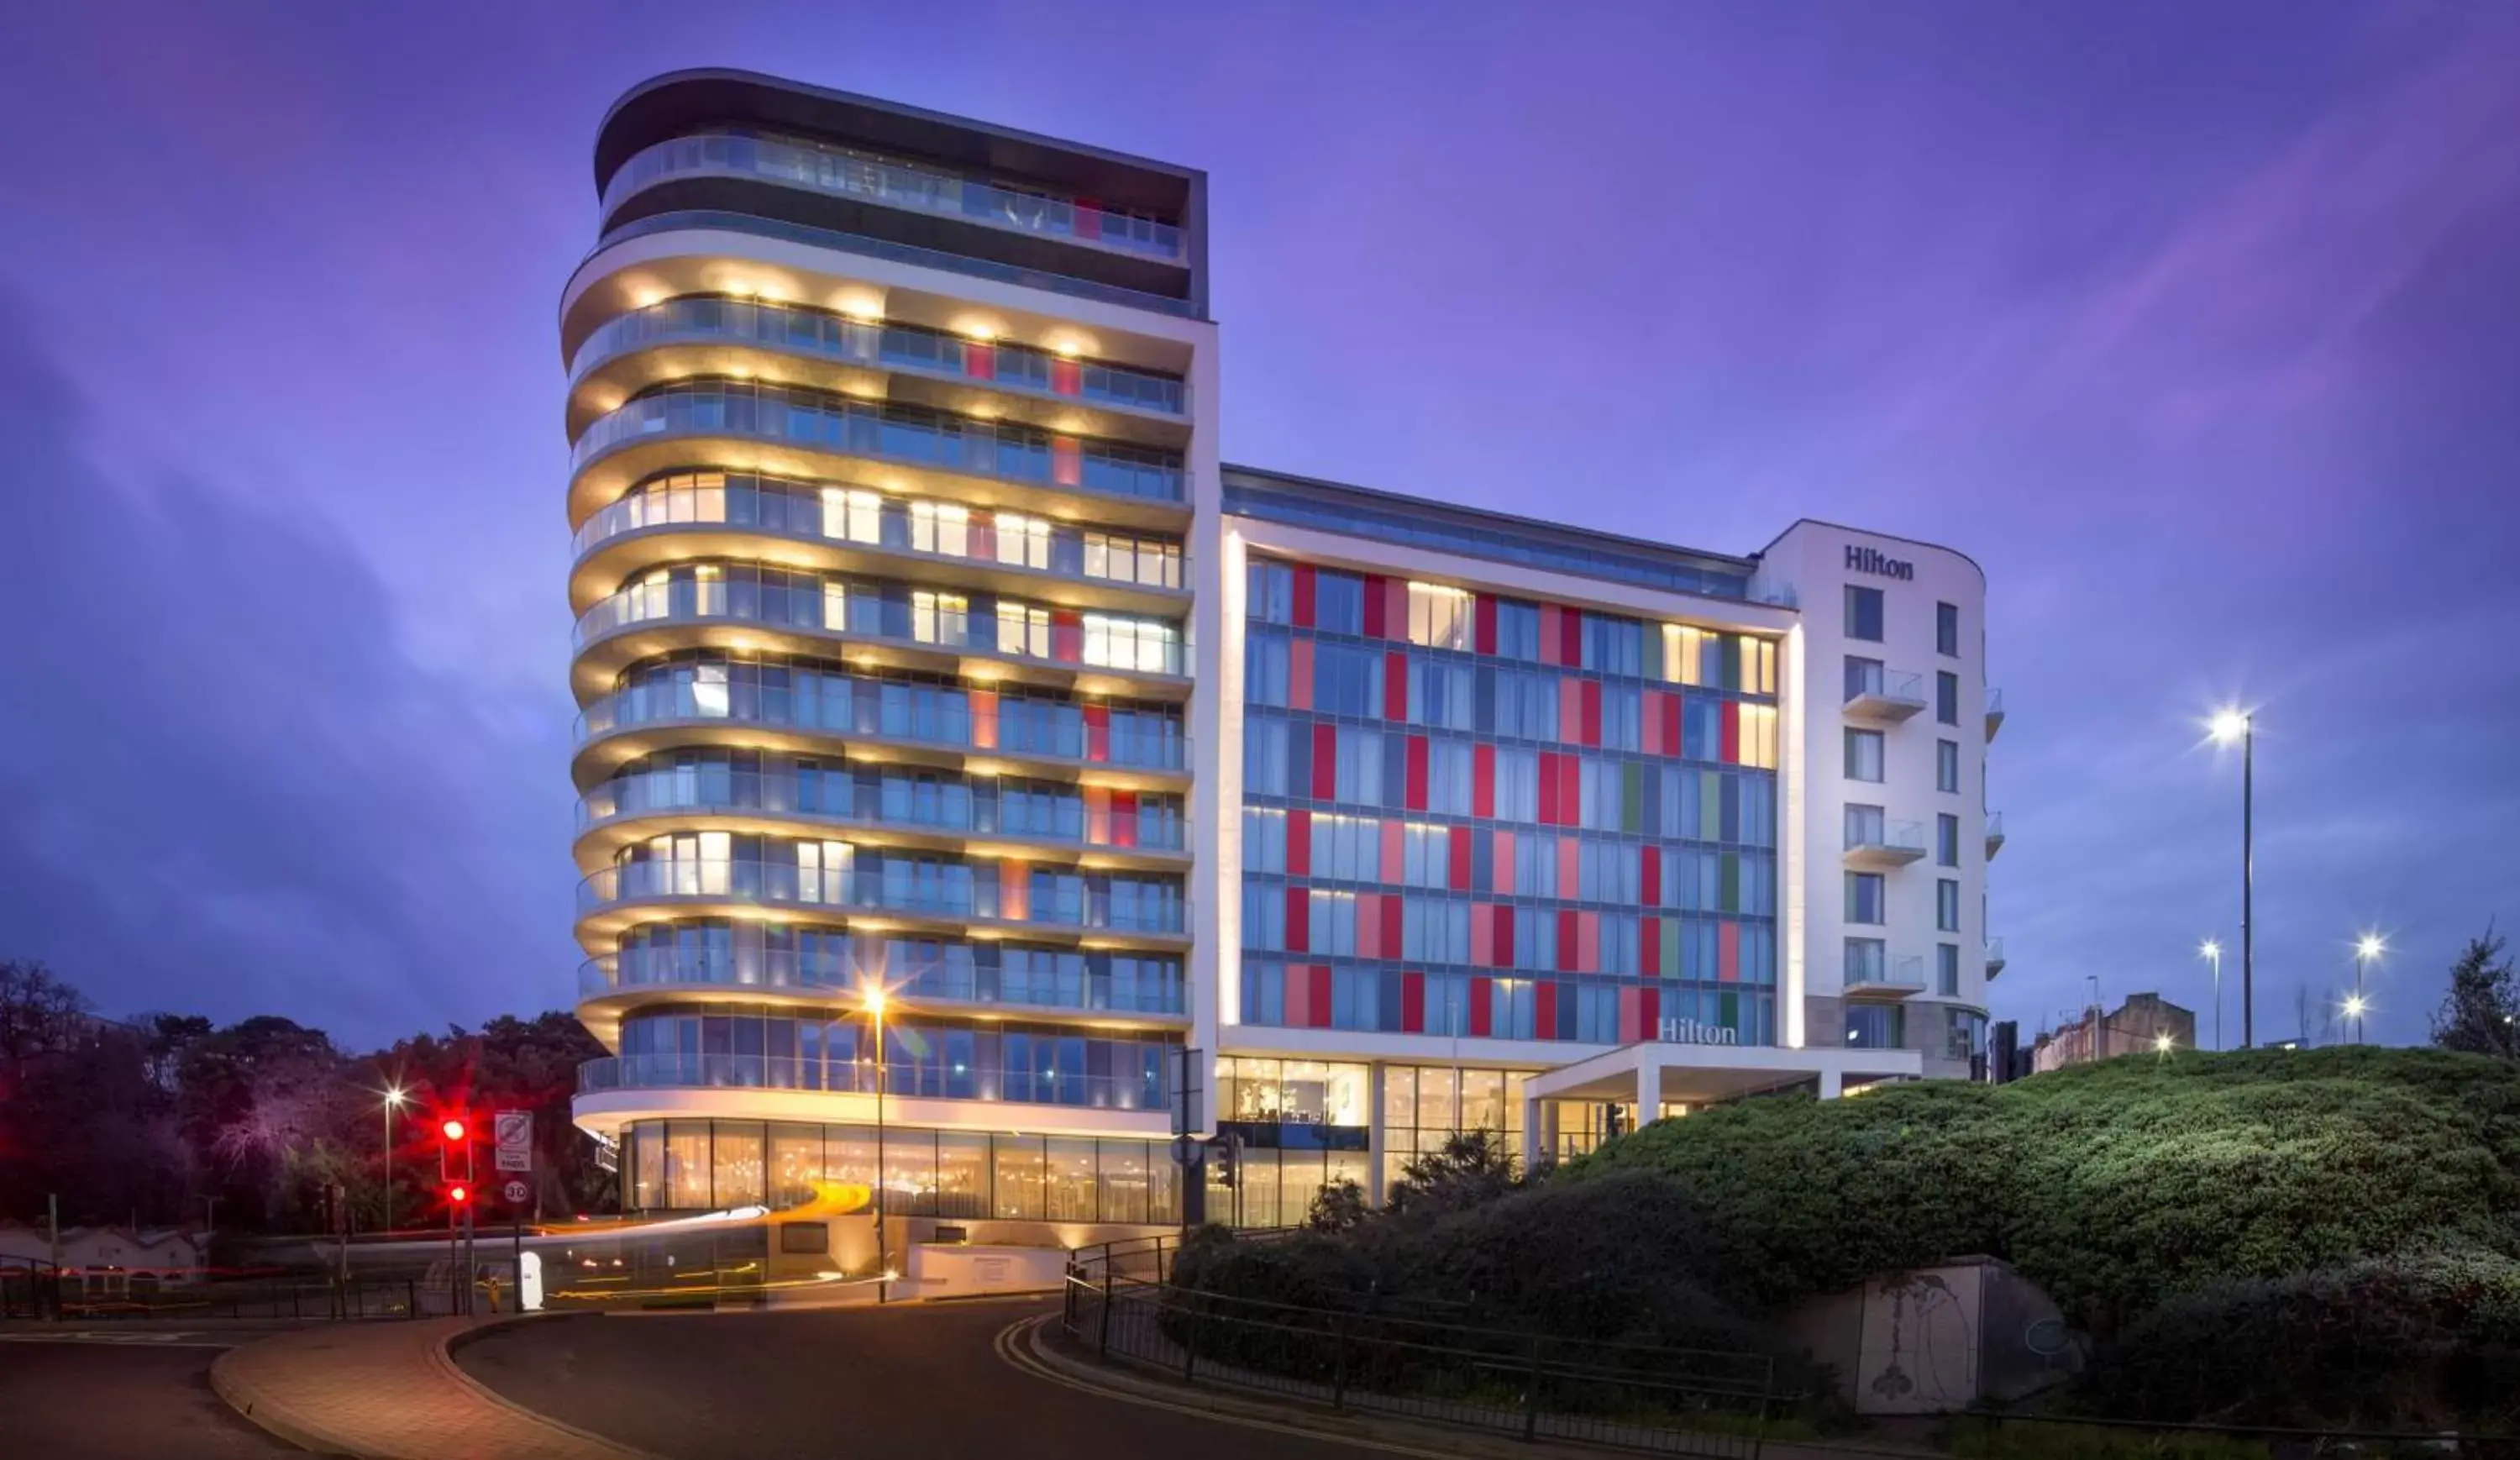 Property Building in Hilton Bournemouth